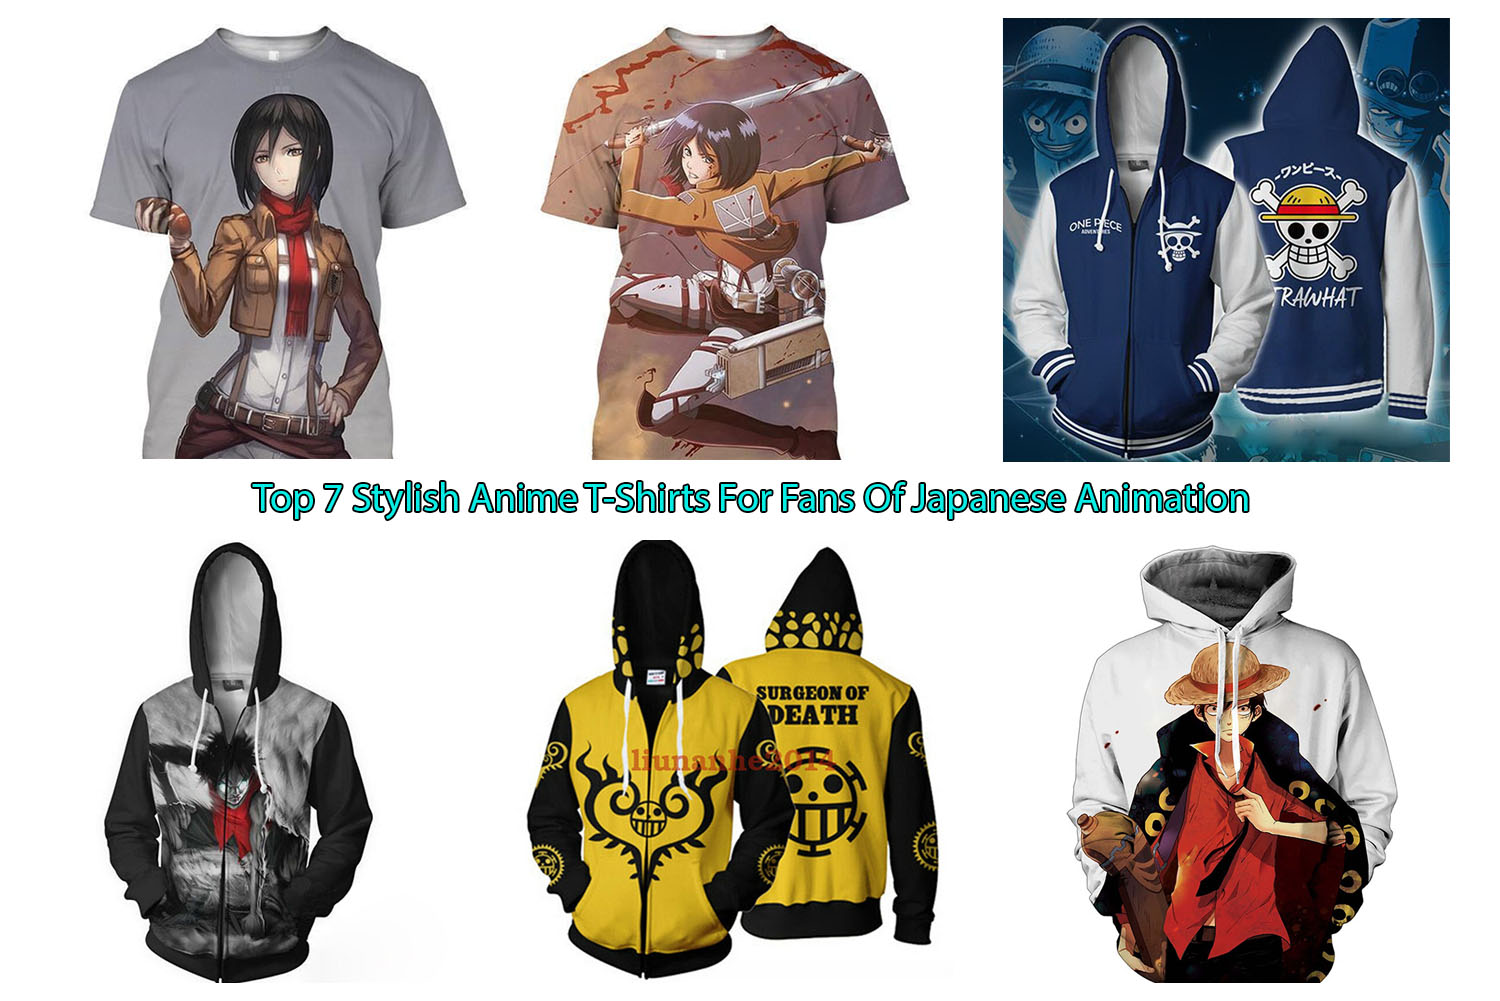 Top 7 Stylish Anime T-Shirts For Fans Of Japanese Animation